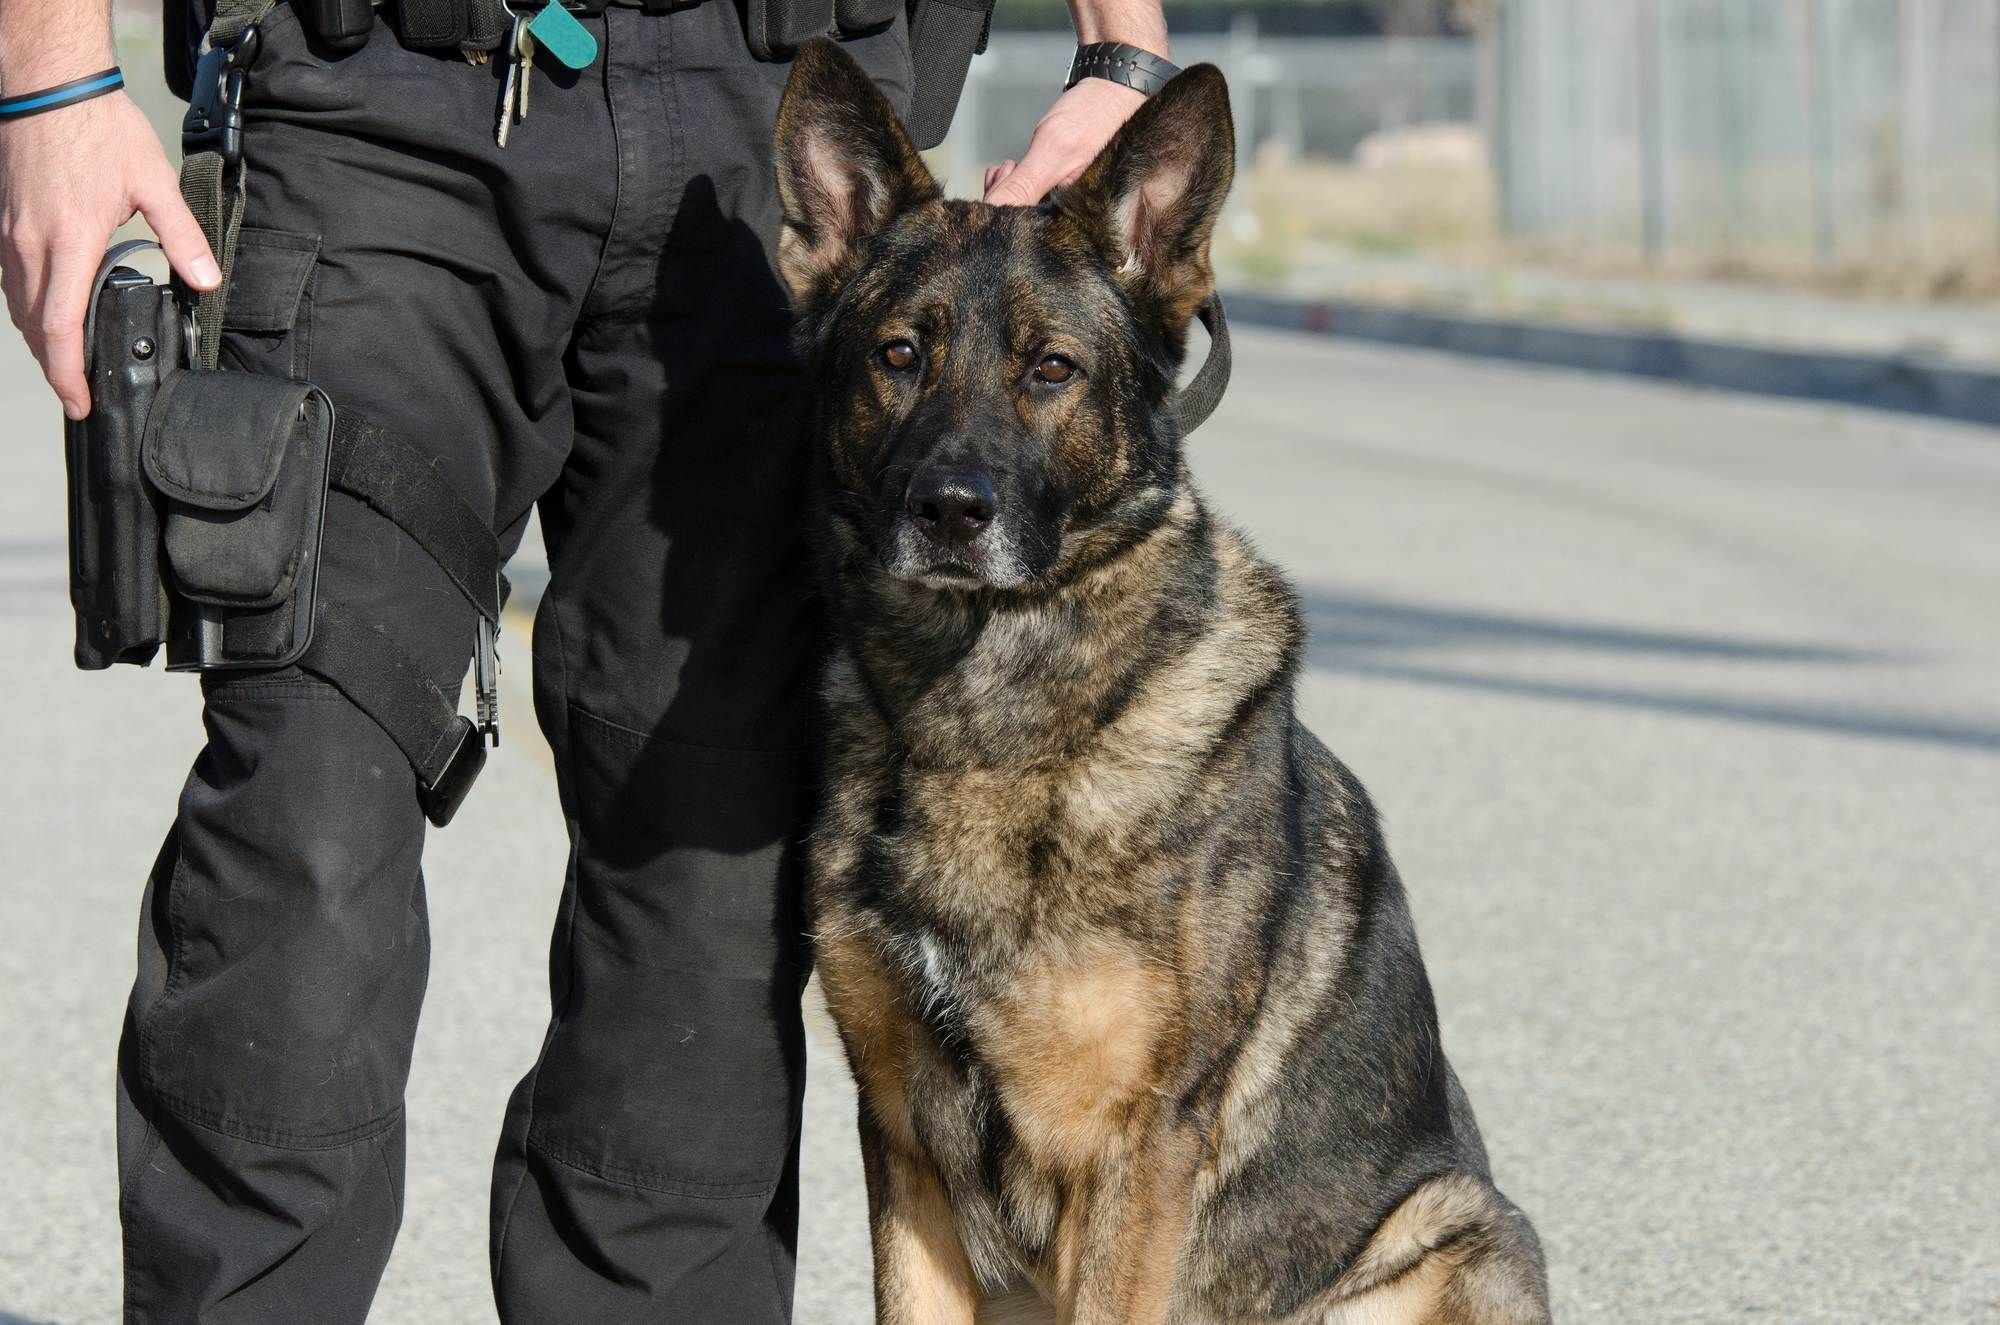 Officer and police dog regarding the vicious RCMP dog attack lawsuit